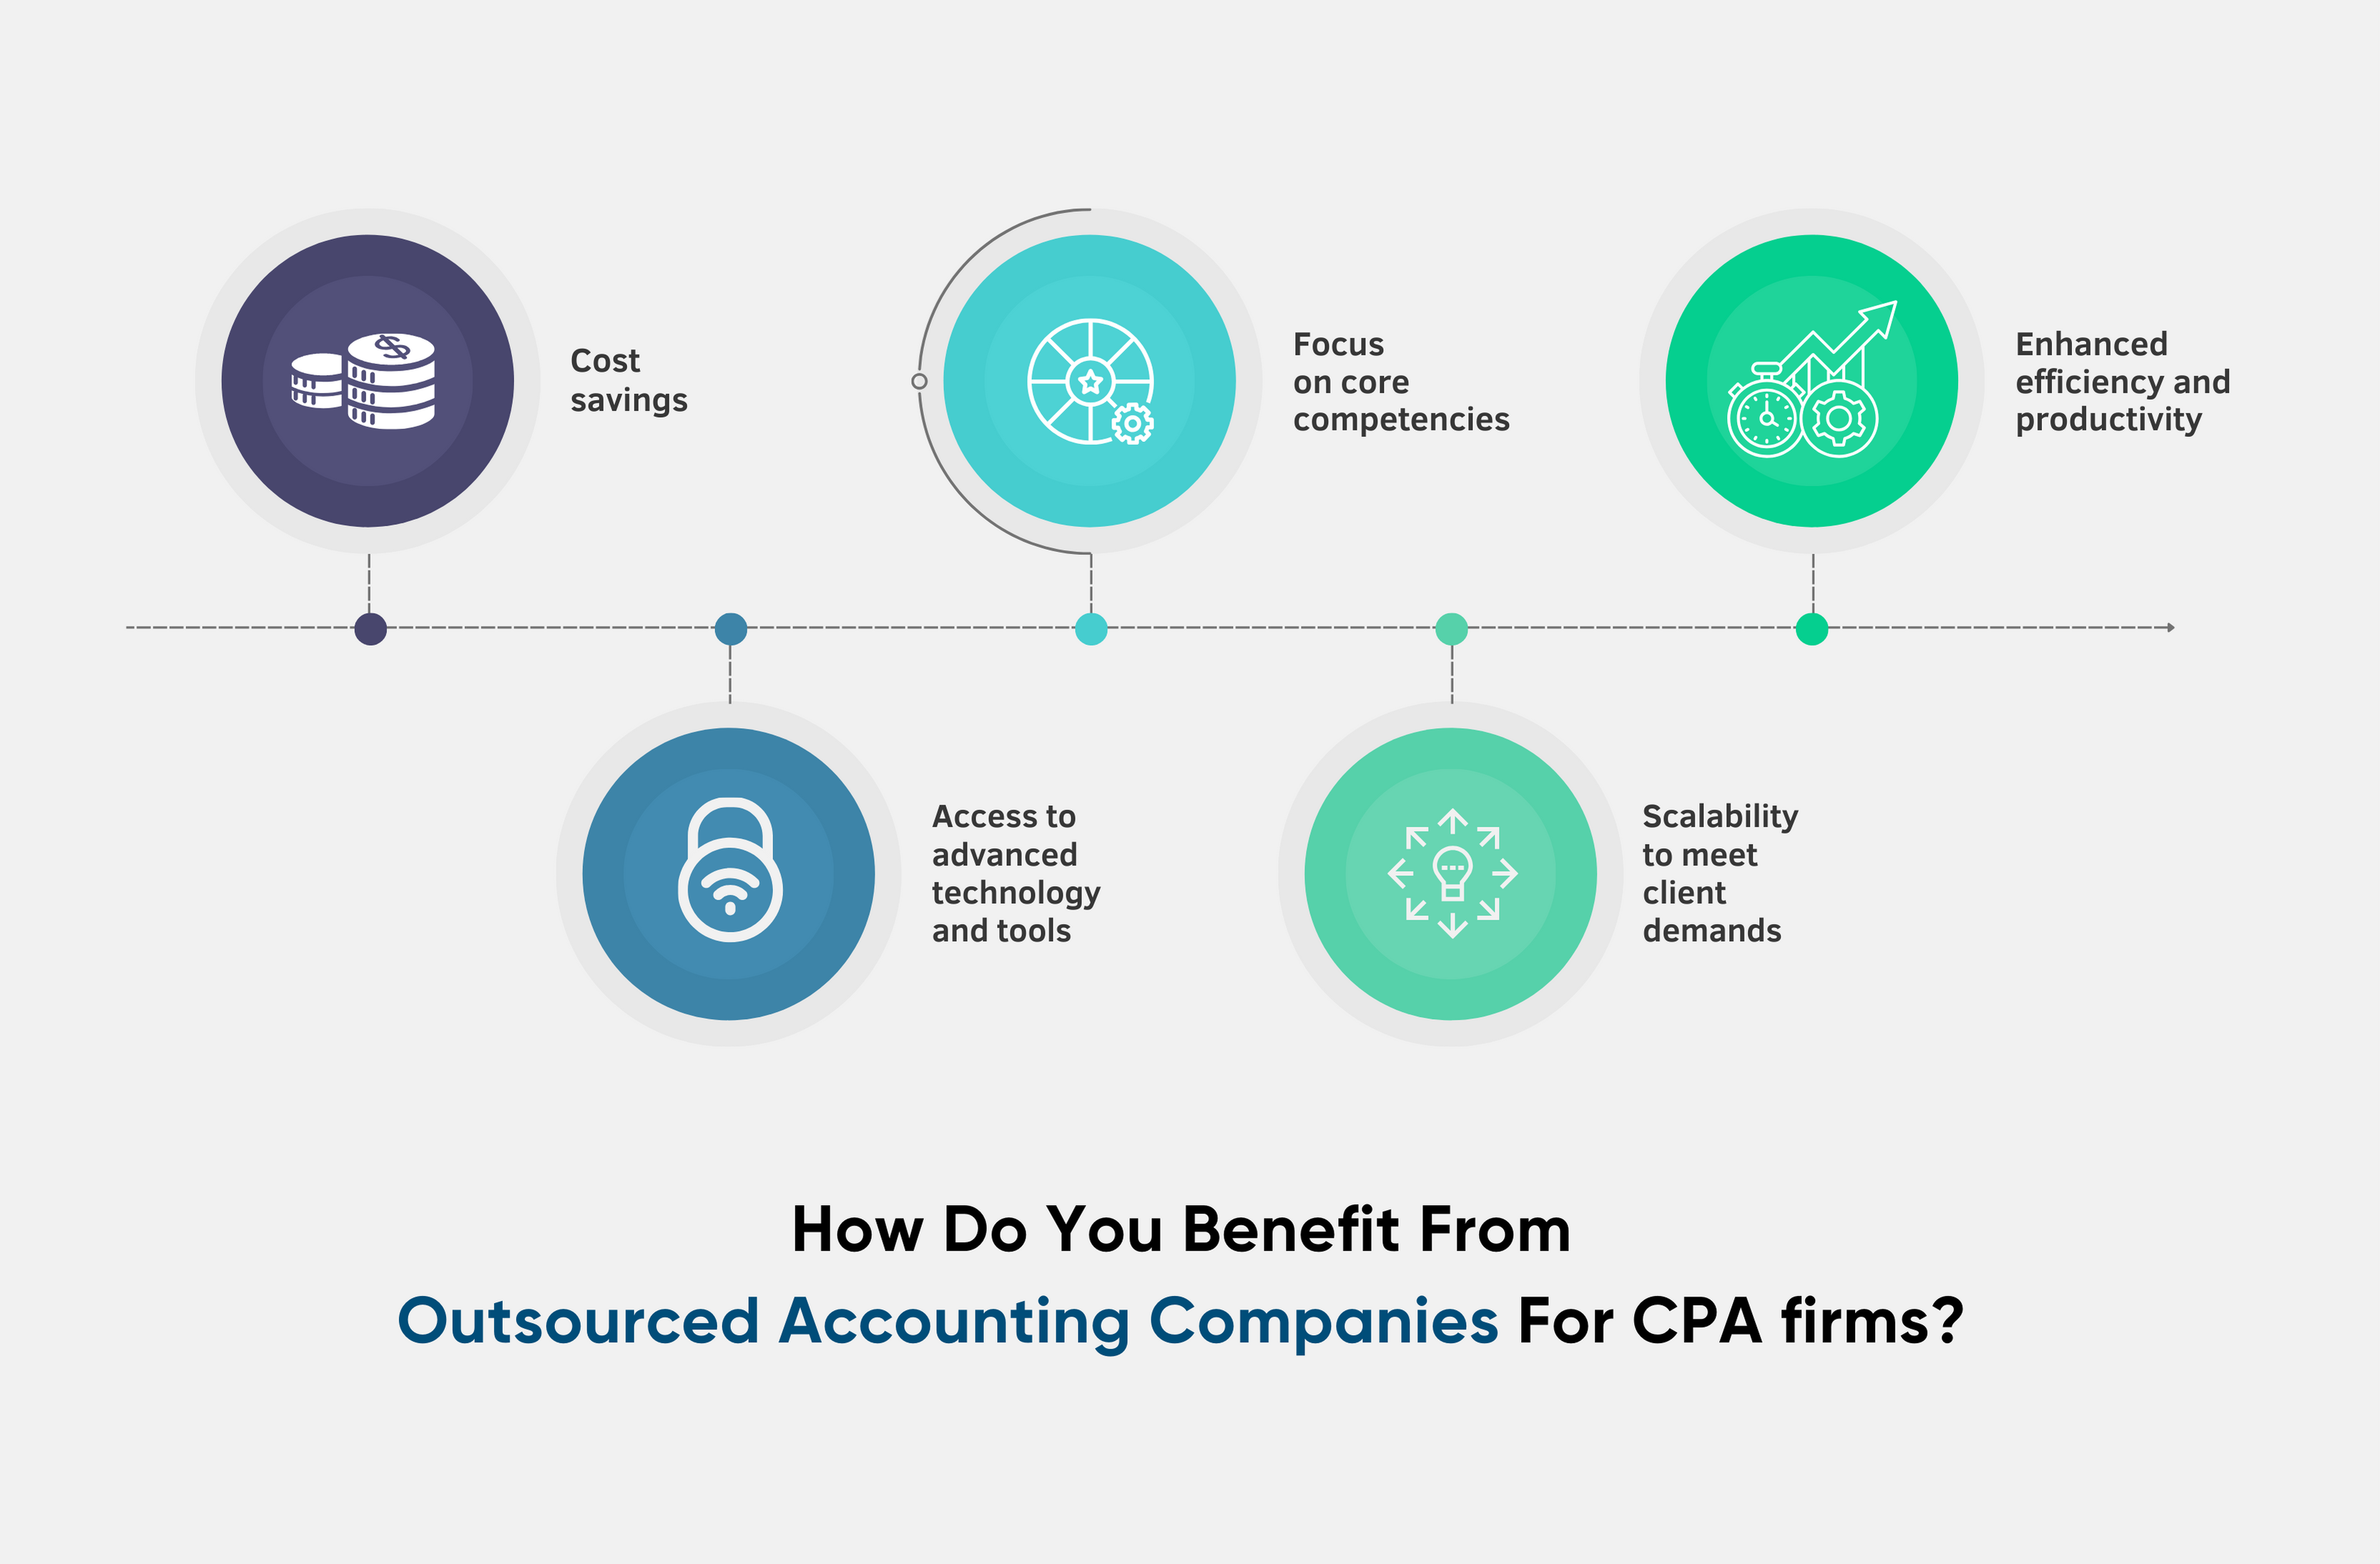 How do you benefit from outsourced accounting companies for CPA firms